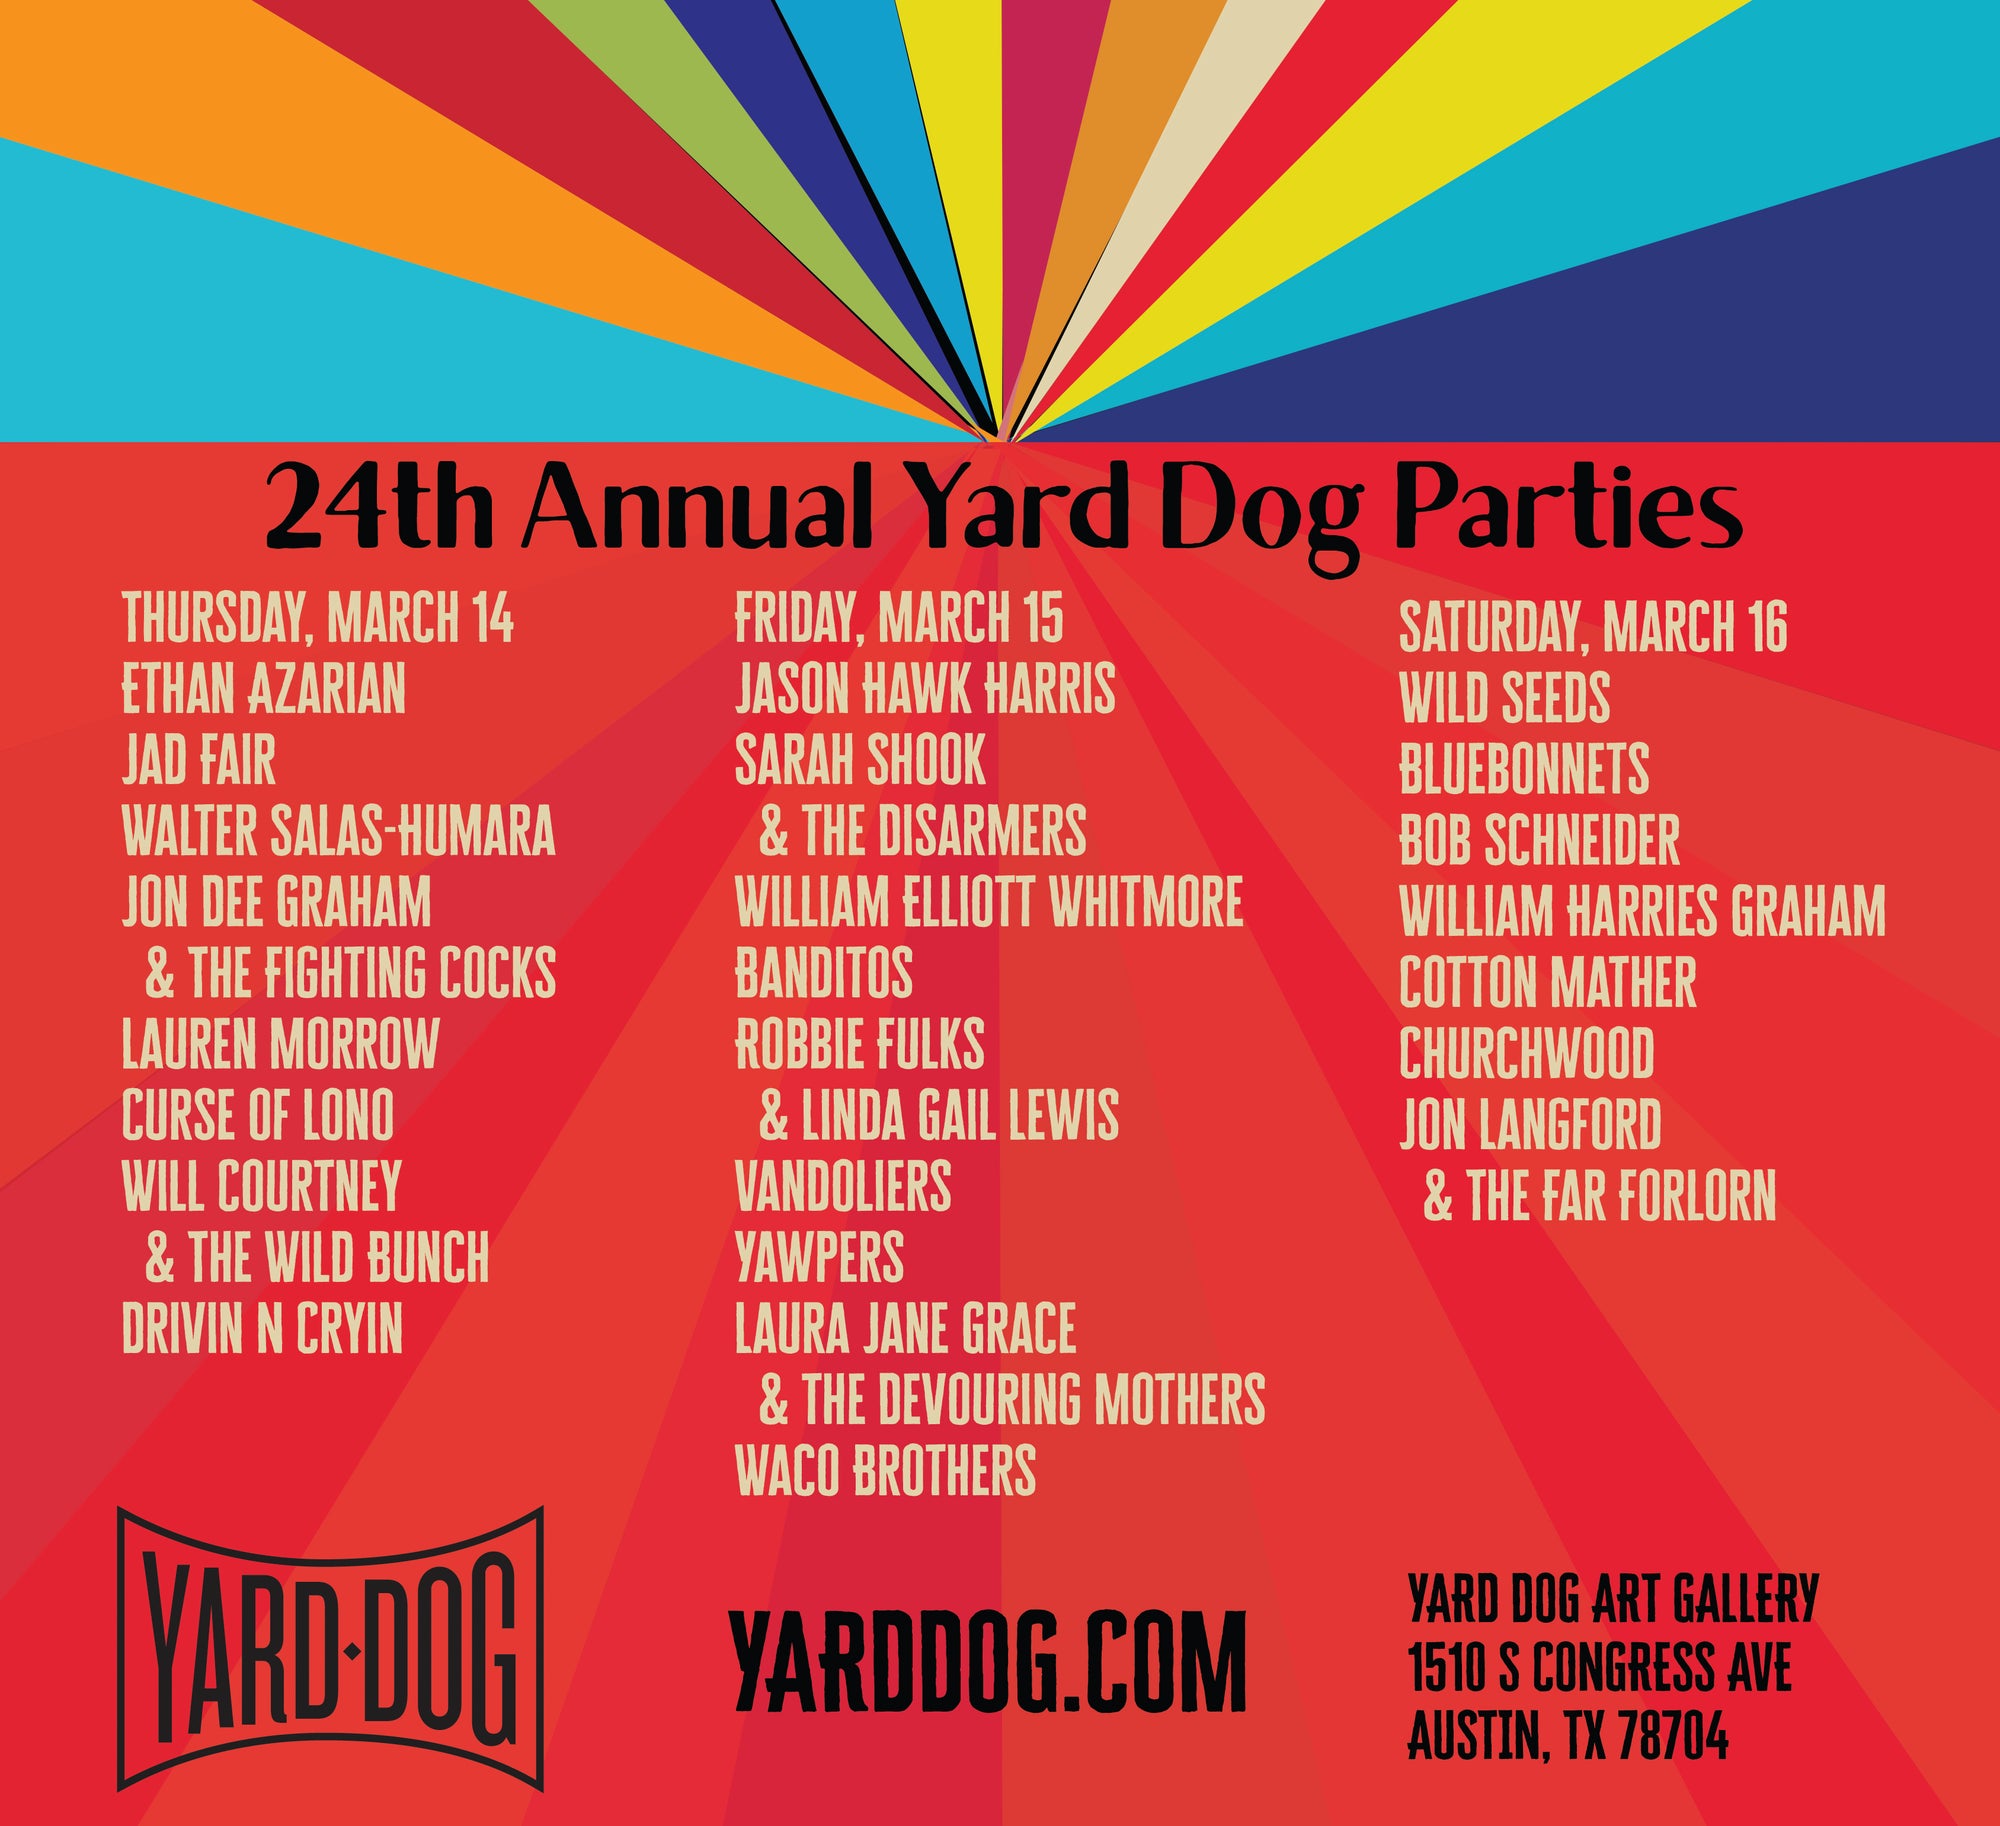 24th Annual Yard Dog Parties